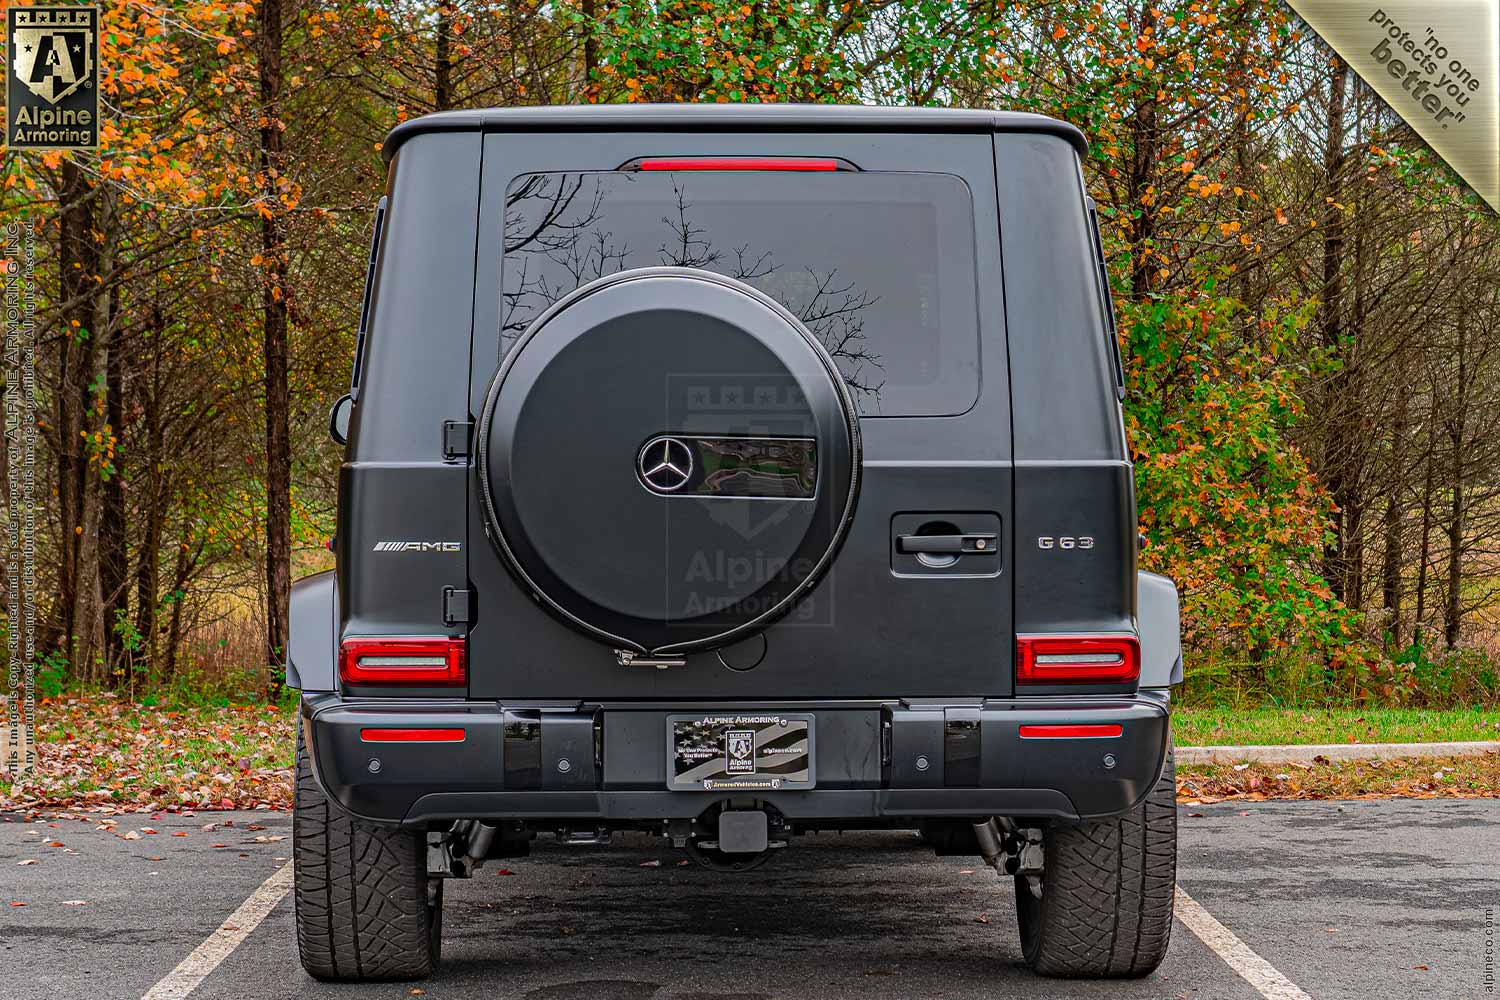 New Inventory armored Mercedes-Benz G63 Level A9/B6+ Exterior & Interior Images VIN:1485